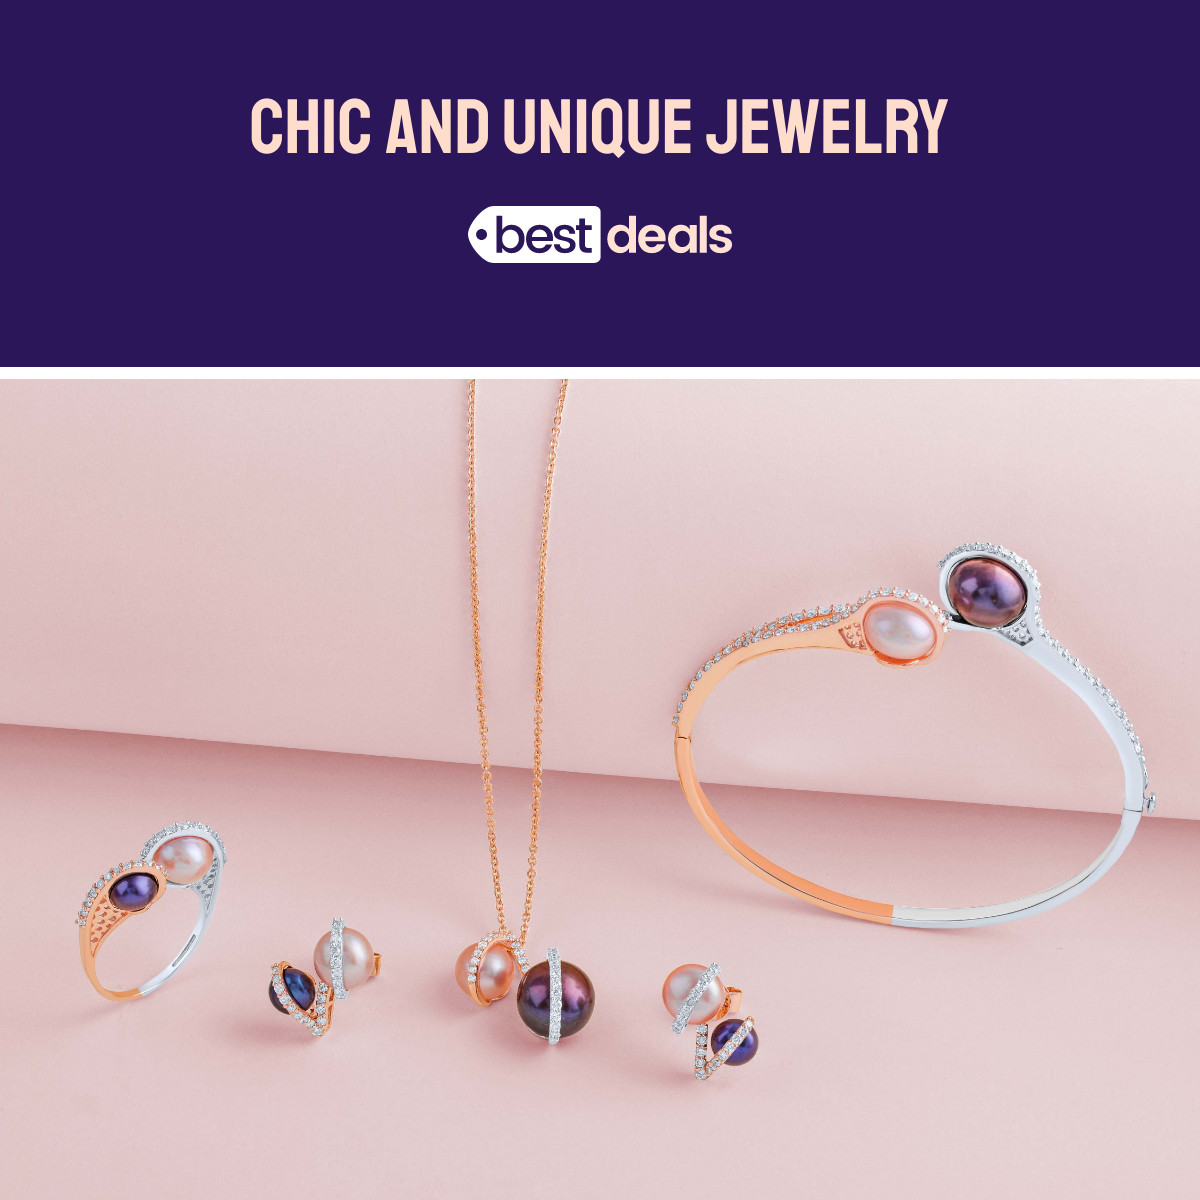 Chic and Unique Jewelry Deals